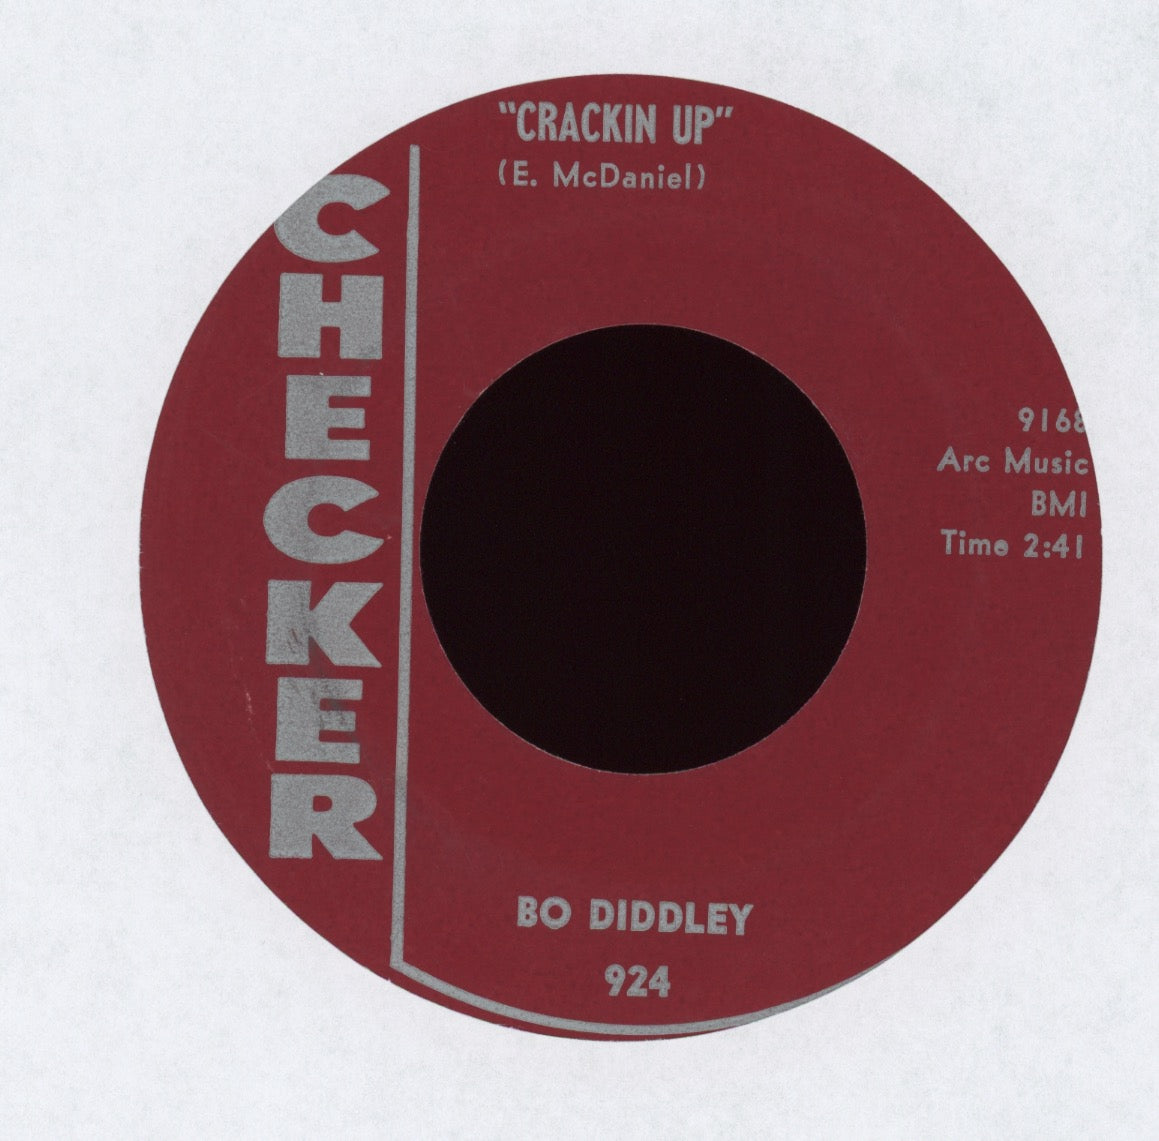 Bo Diddley - The Great Grandfather on Checker